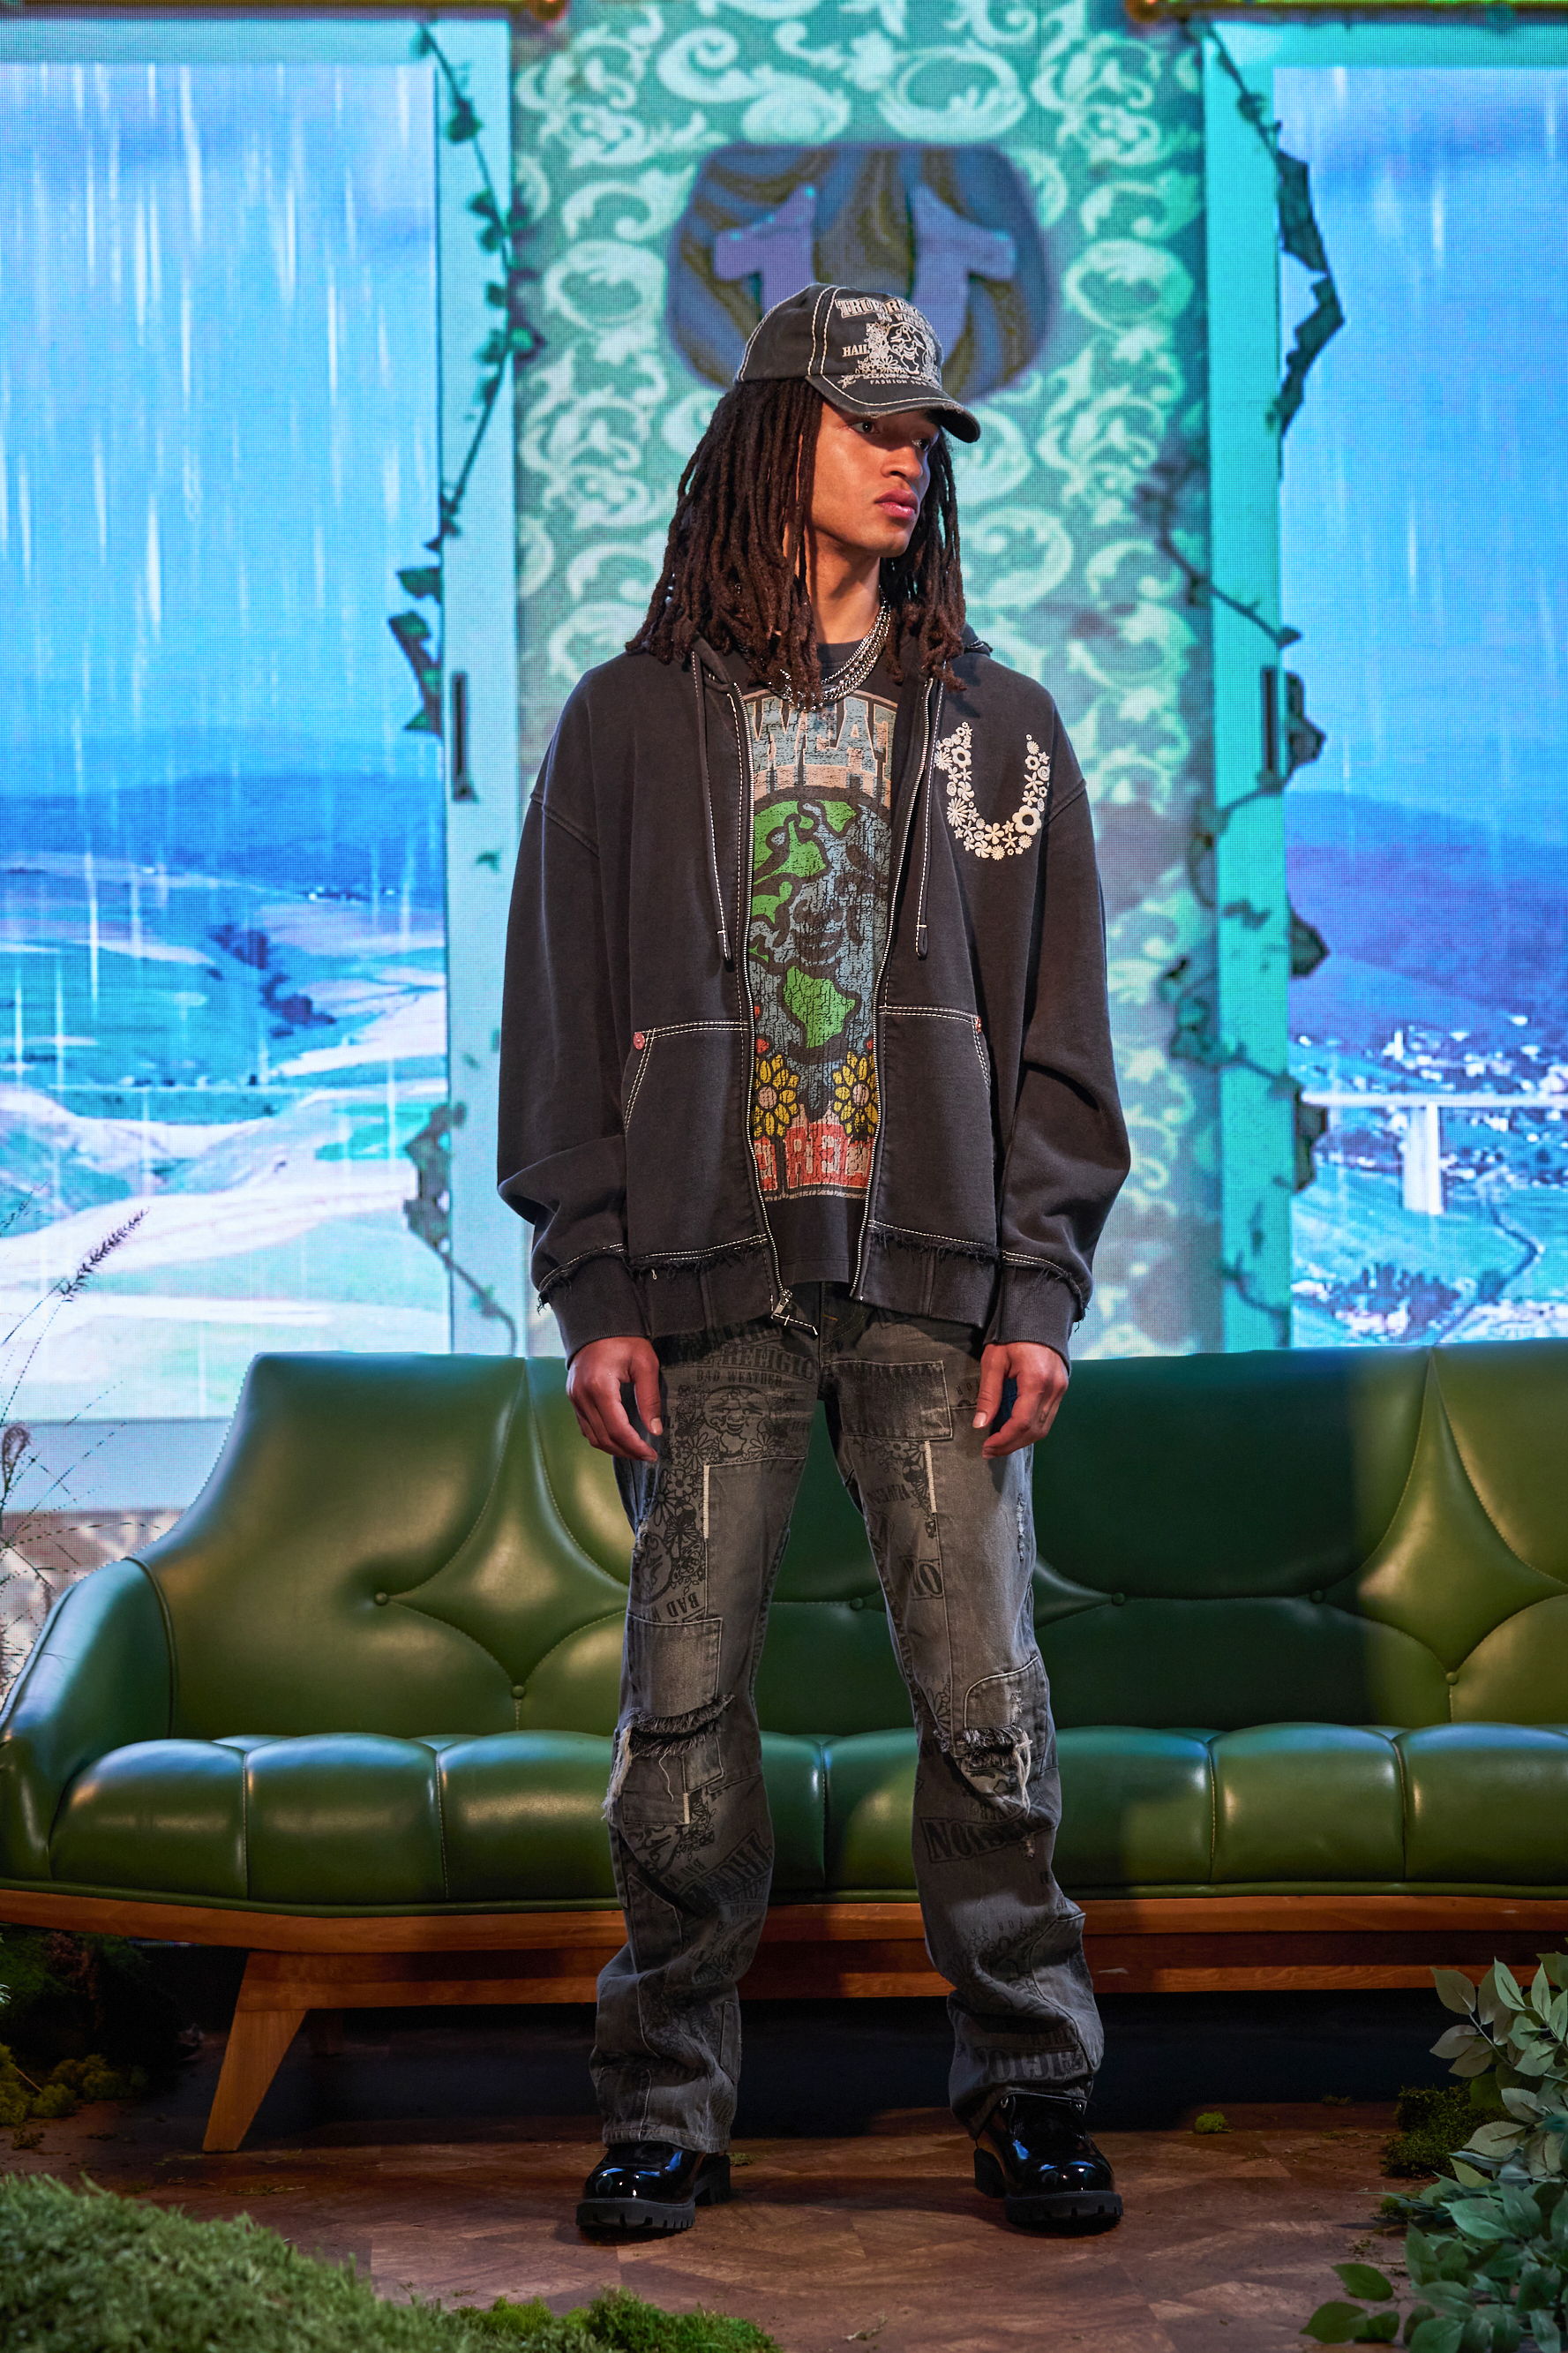 Model wearing a patterned baseball cap, graphic shirt, hoodie, and distressed jeans stands in front of a scenic digital backdrop during a fashion show